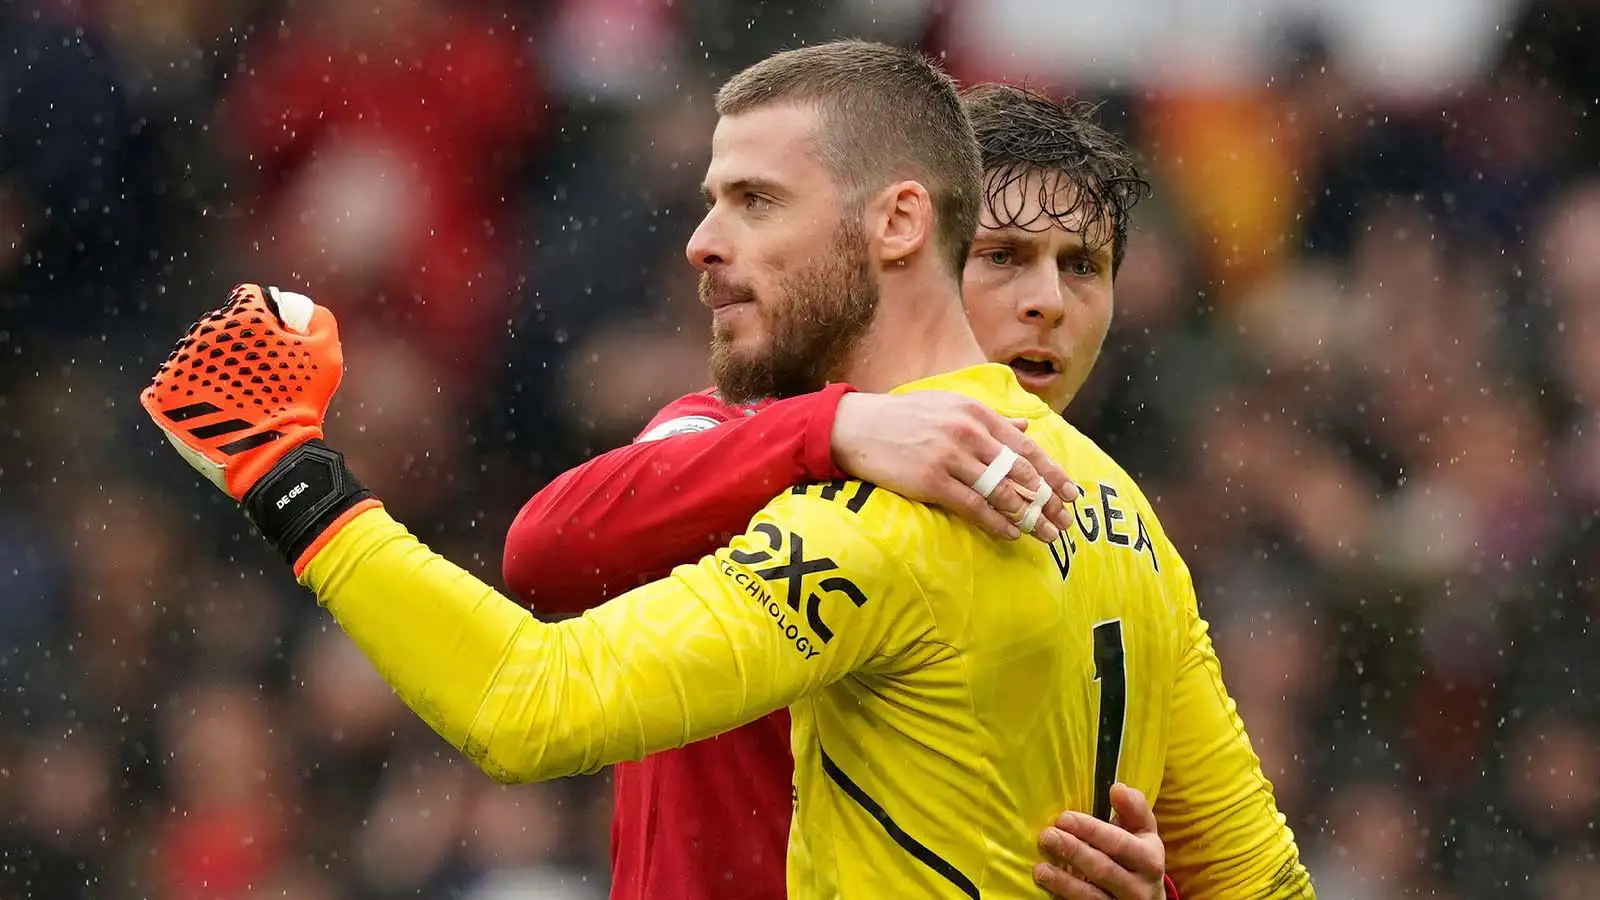 David De Gea of Manchester United reacts with Victor Lindelof of Manchester United at the final whistle during the Premier League match at Old Trafford